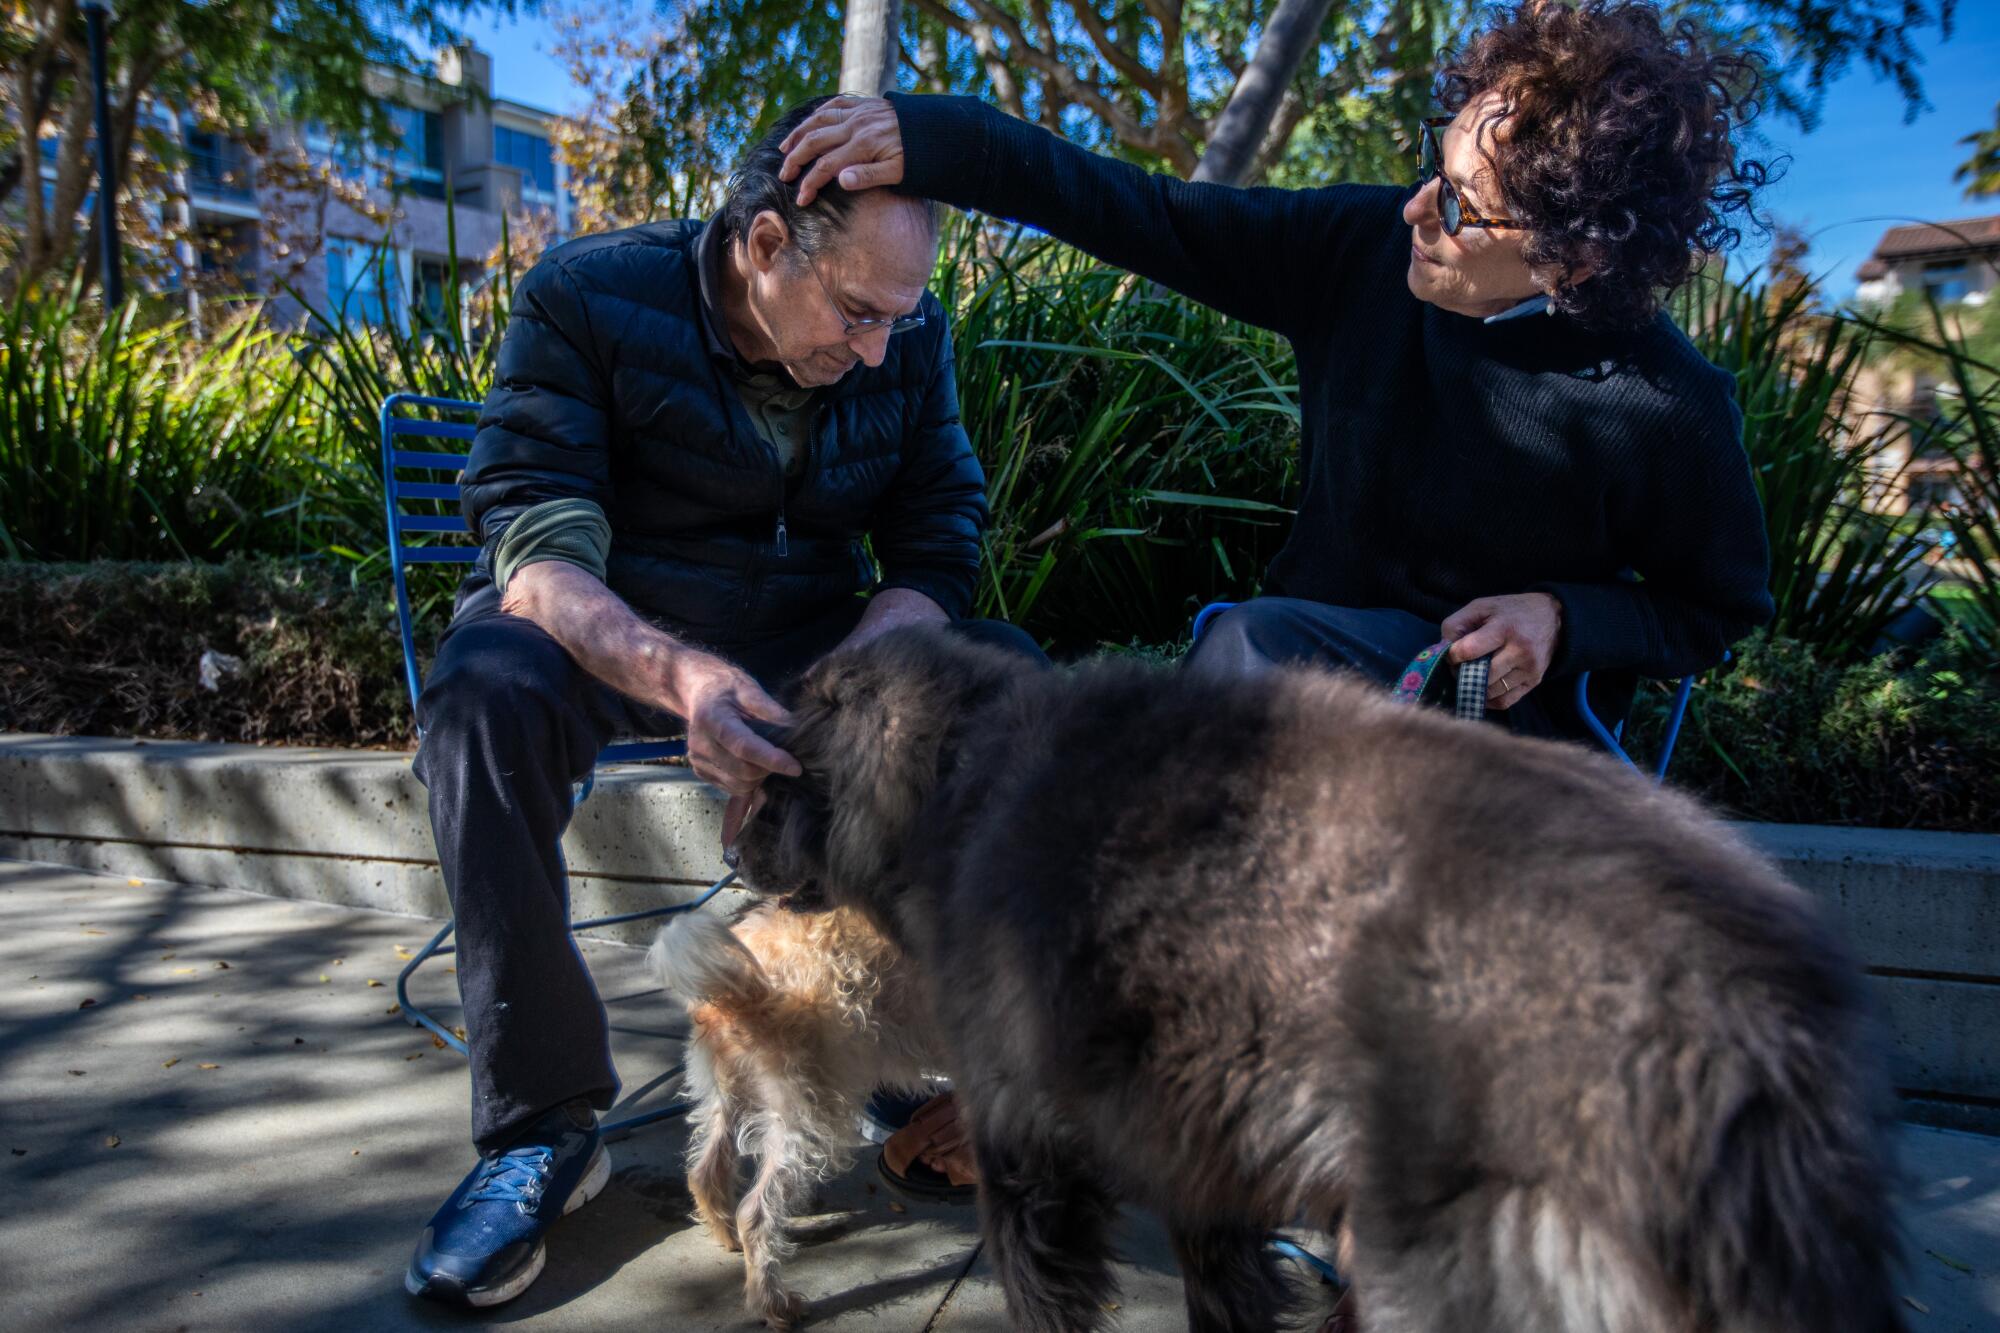 David Milch pets two dogs as Rita Milch brushes his hair back